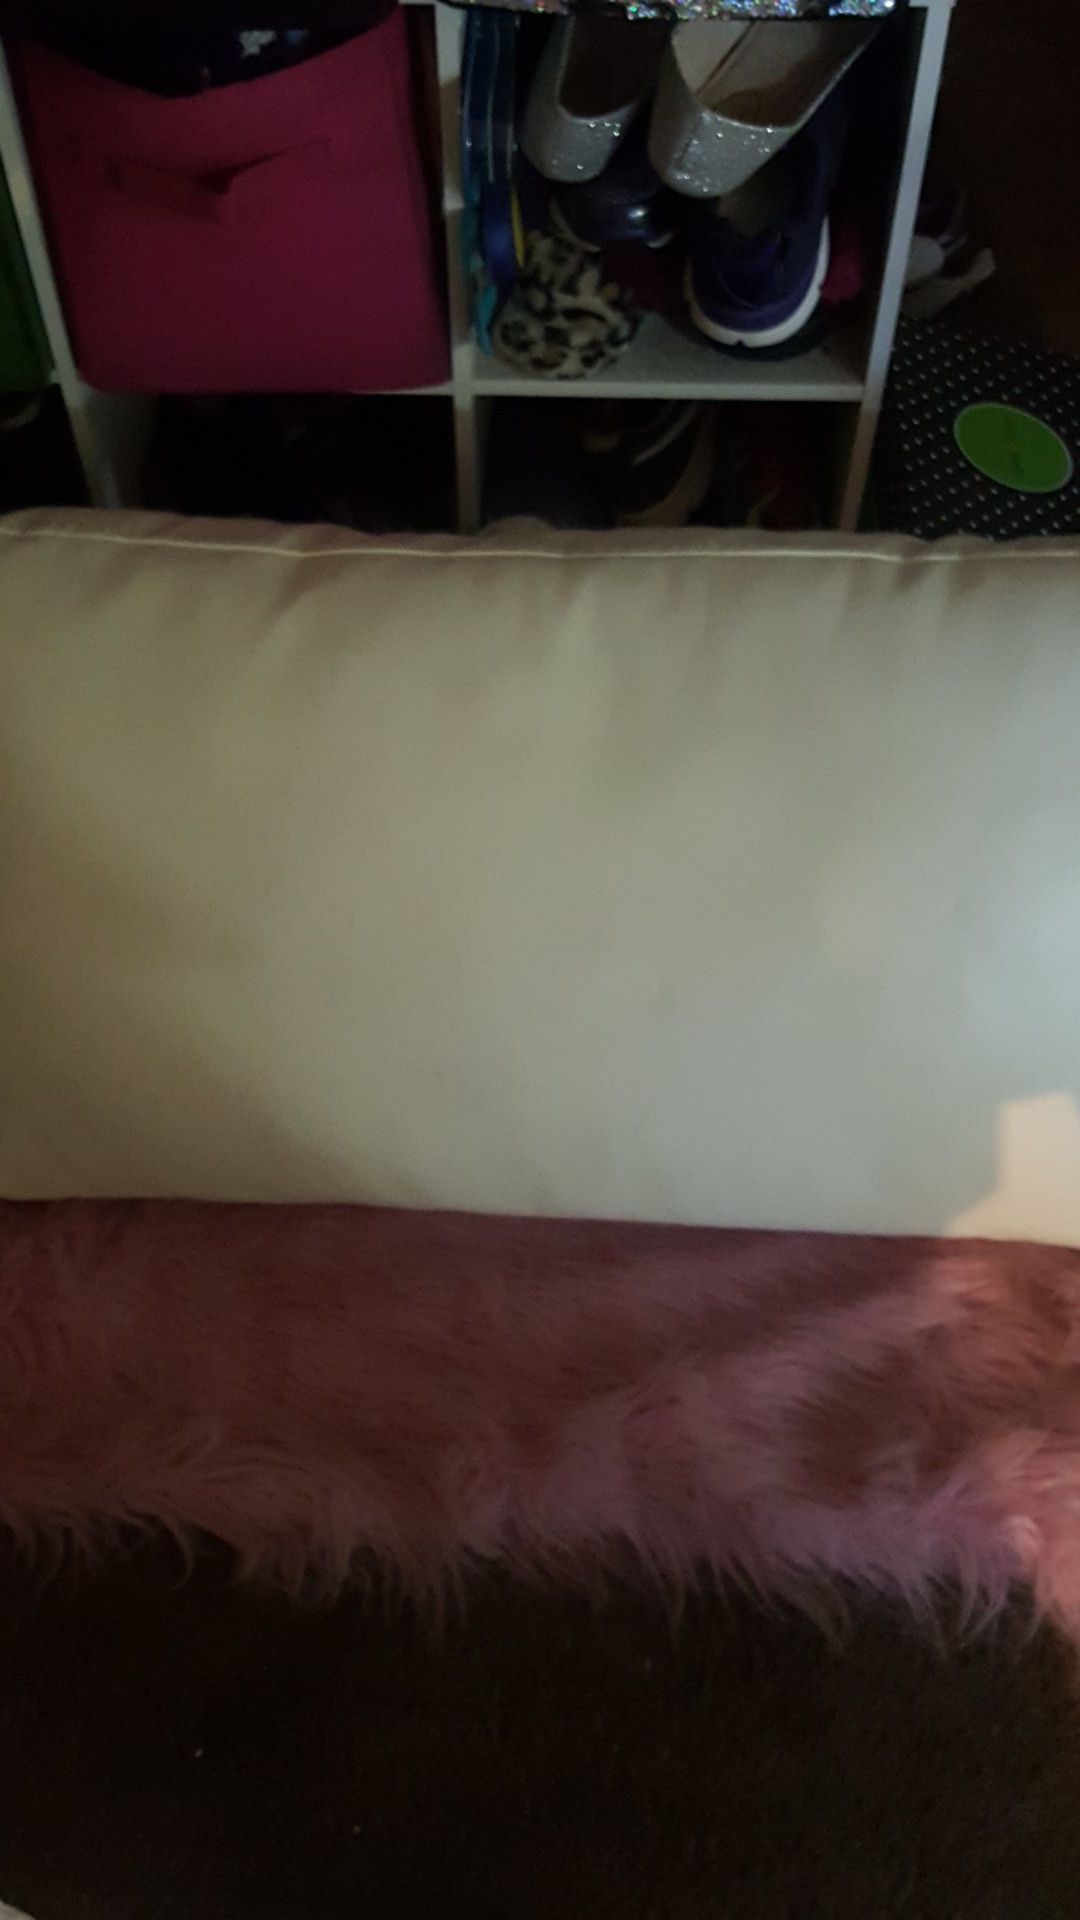 DONATED GONE TOMORROW SALVATION ARMY TRUCK COMING LAST DAY YOU TELL ME PRICE OR ITS DONATED 2 LARGE GENUINE LEATHER PILLOWS 40 this weekend only